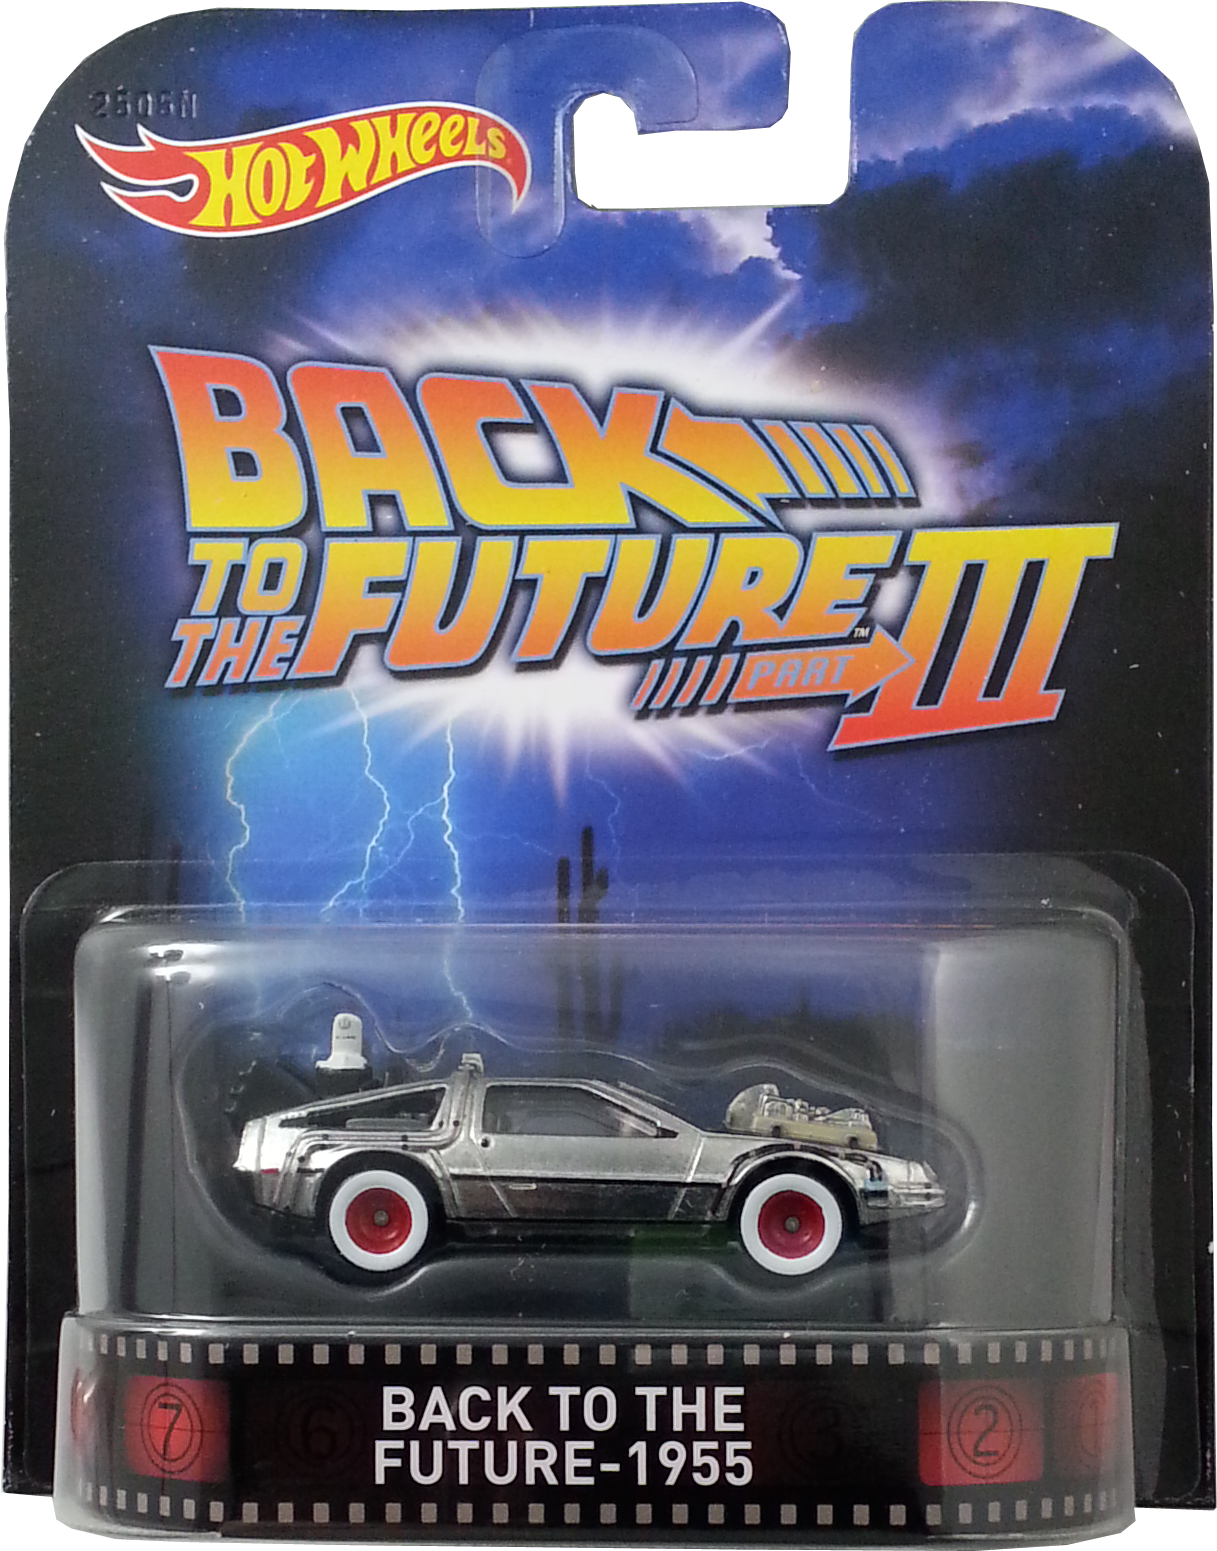 Back to the Future DeLorean Time Machine: Everything You Need to Know